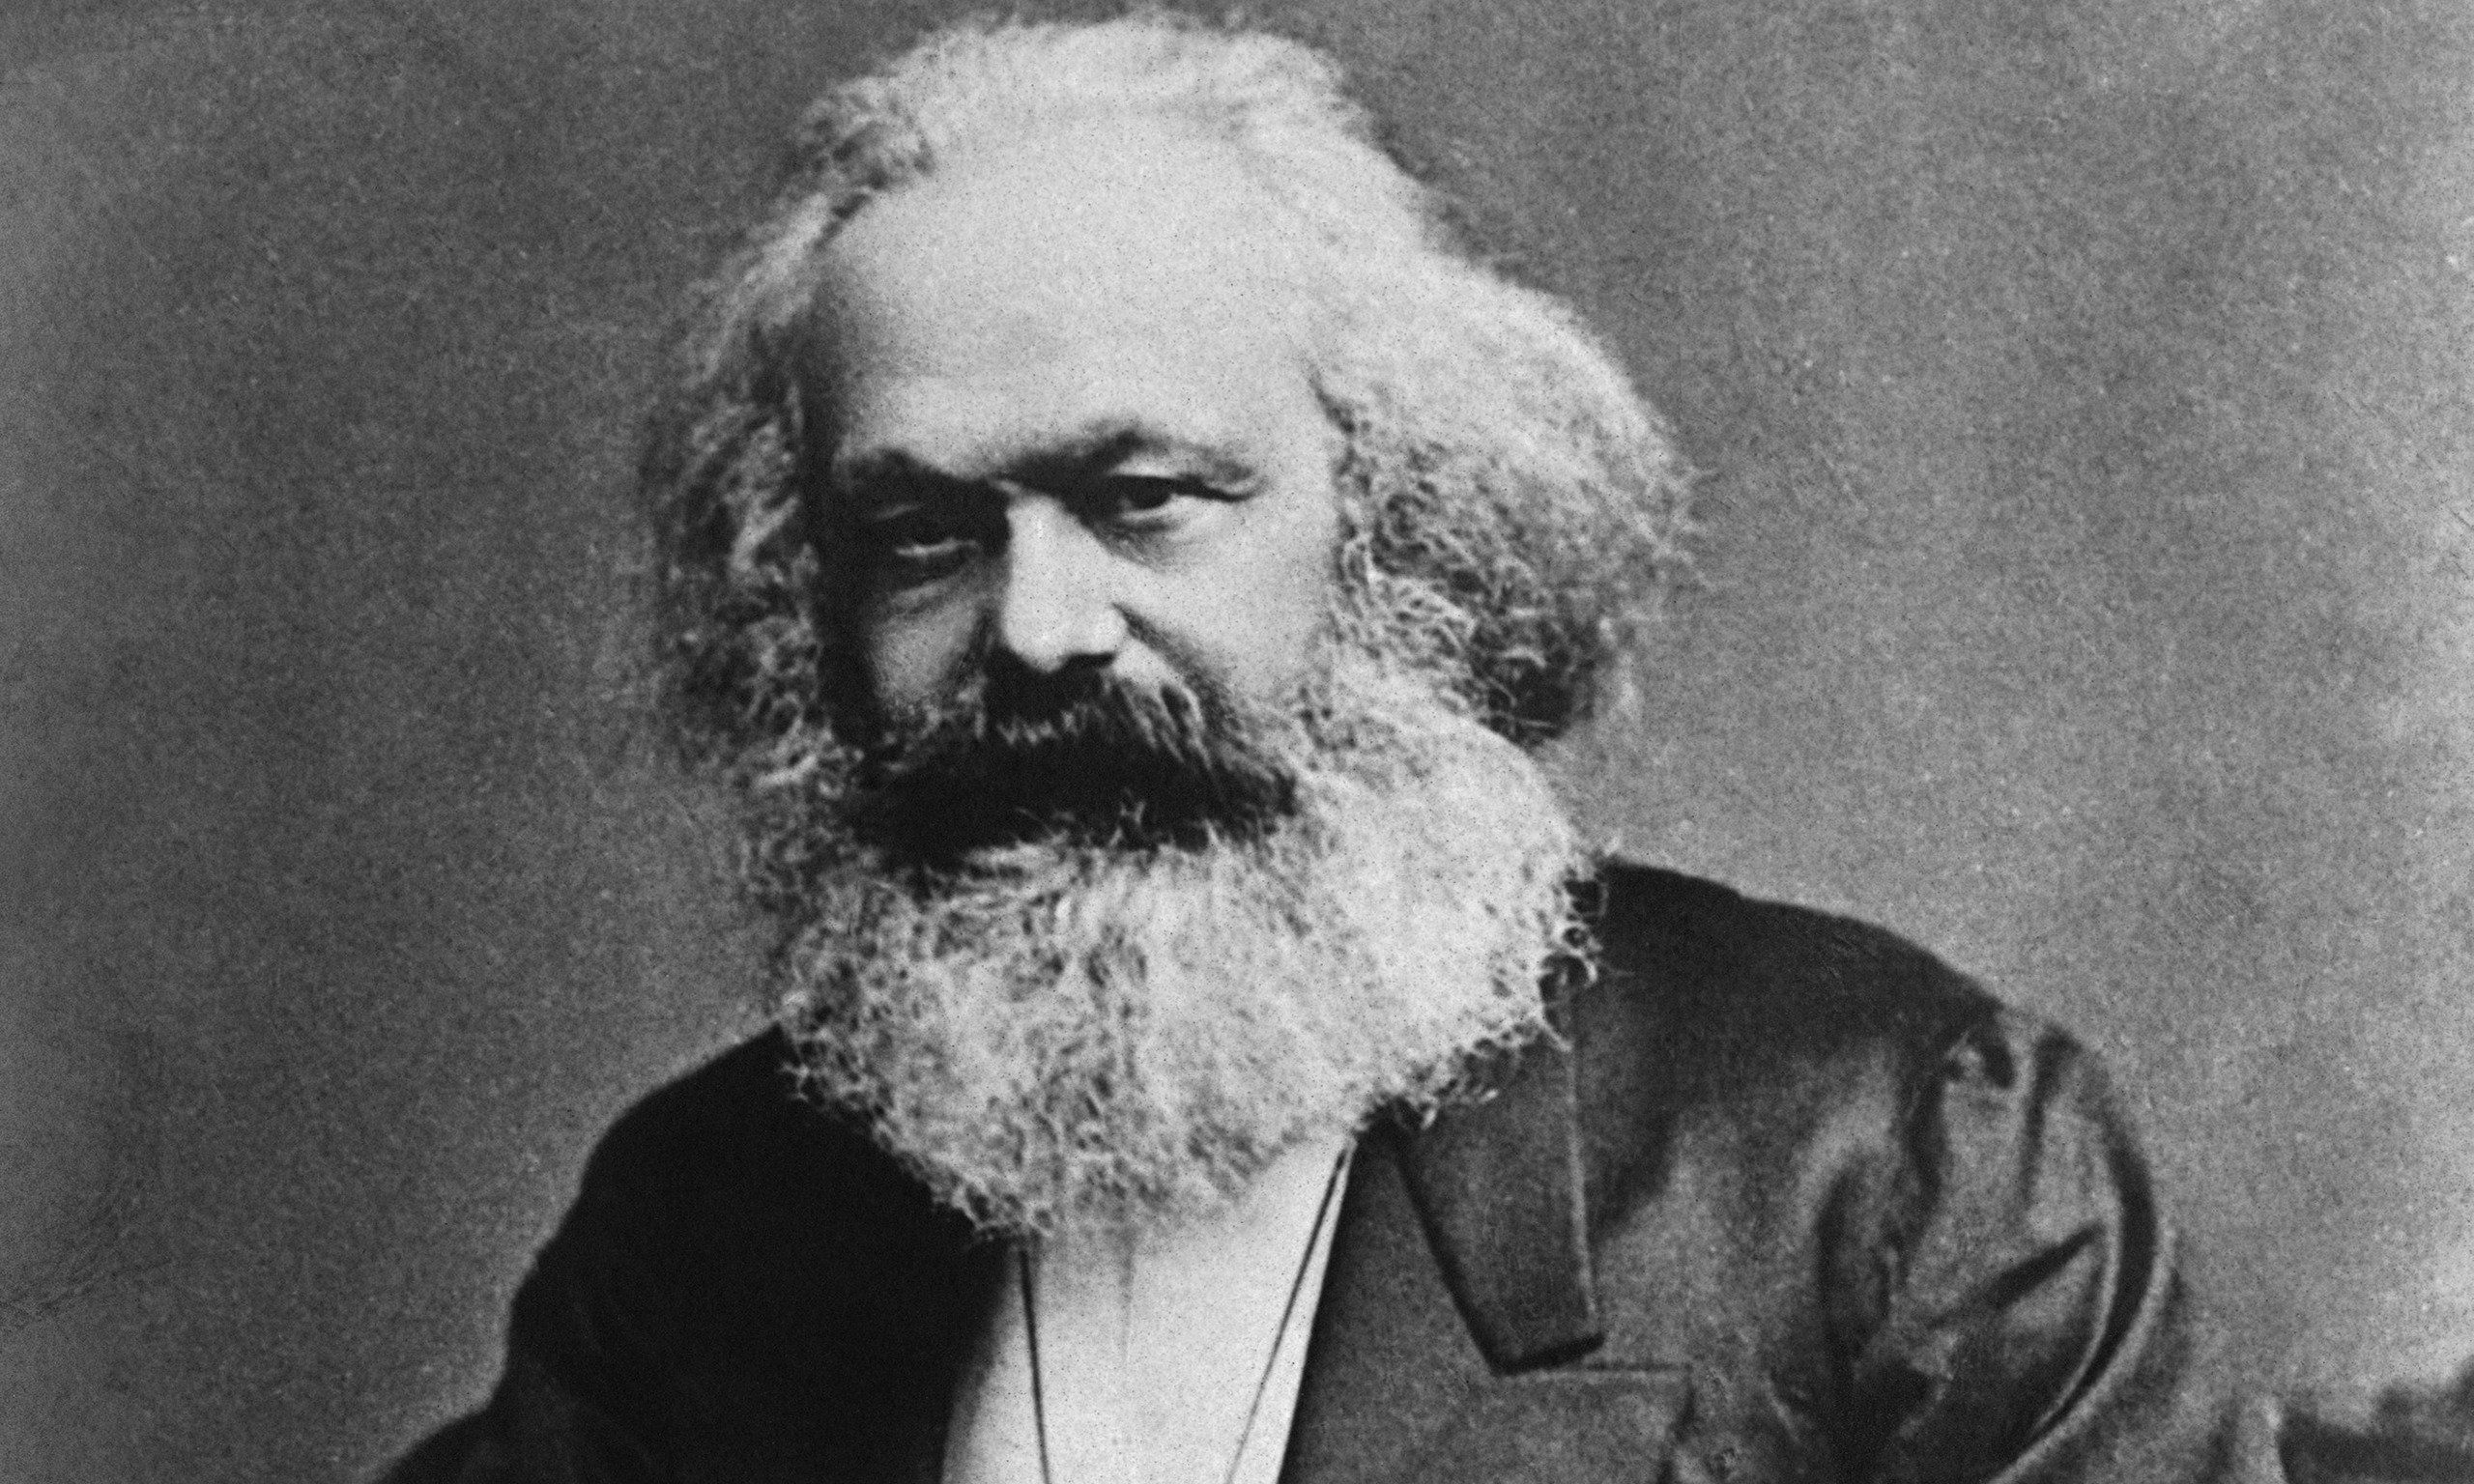 Road G. reccomend Karl marx domination of capital